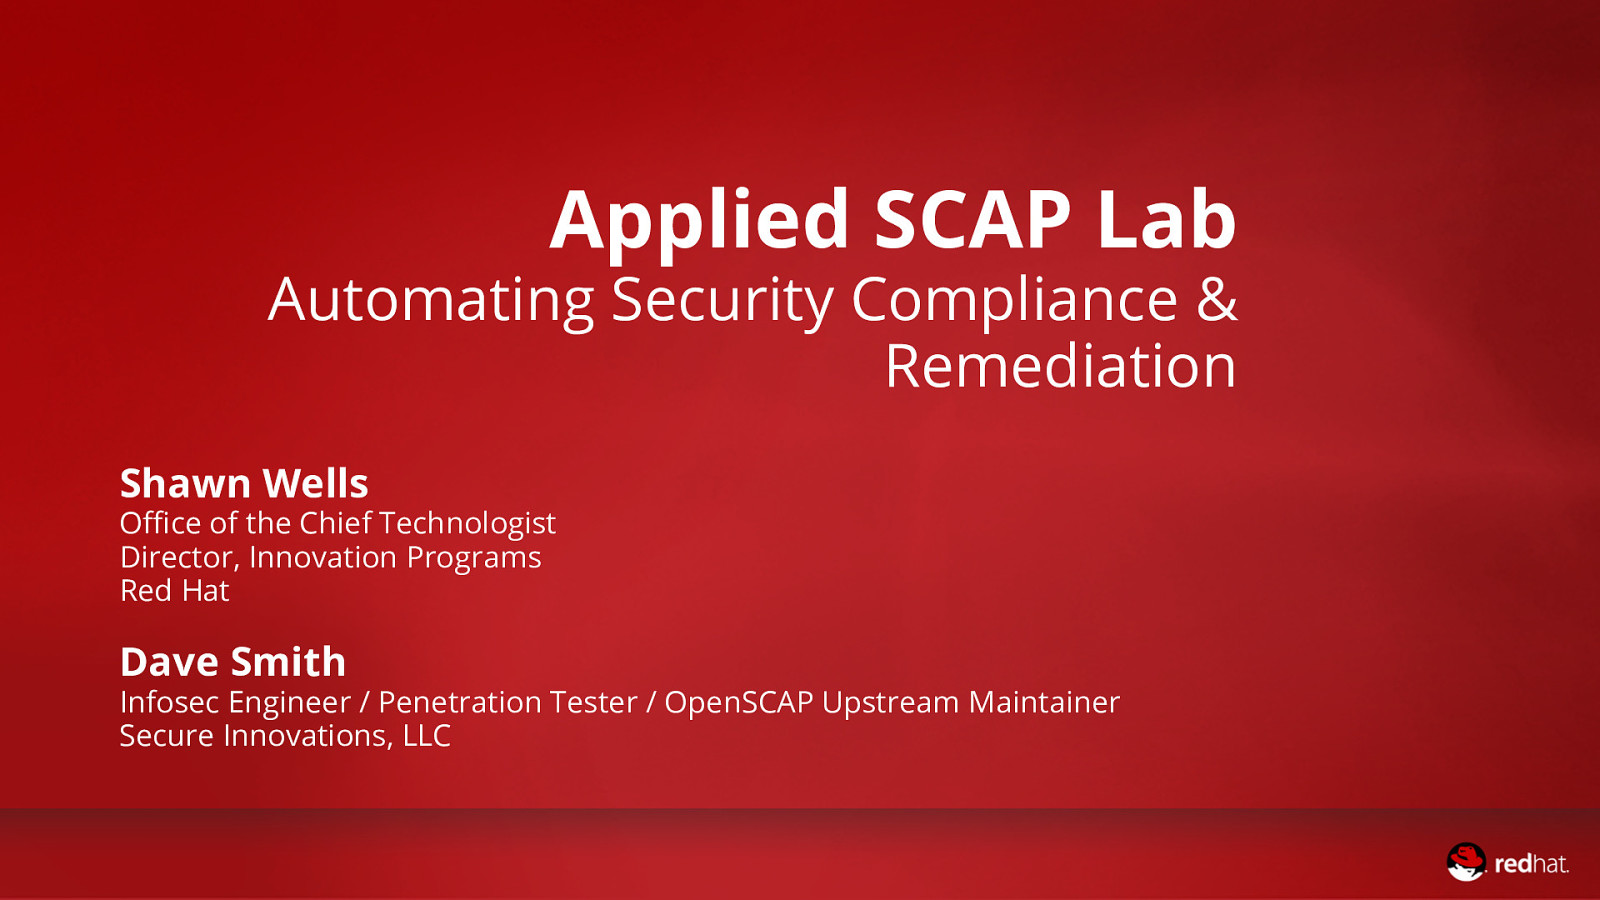 Applied SCAP Lab: Automating Security Compliance & Remediation